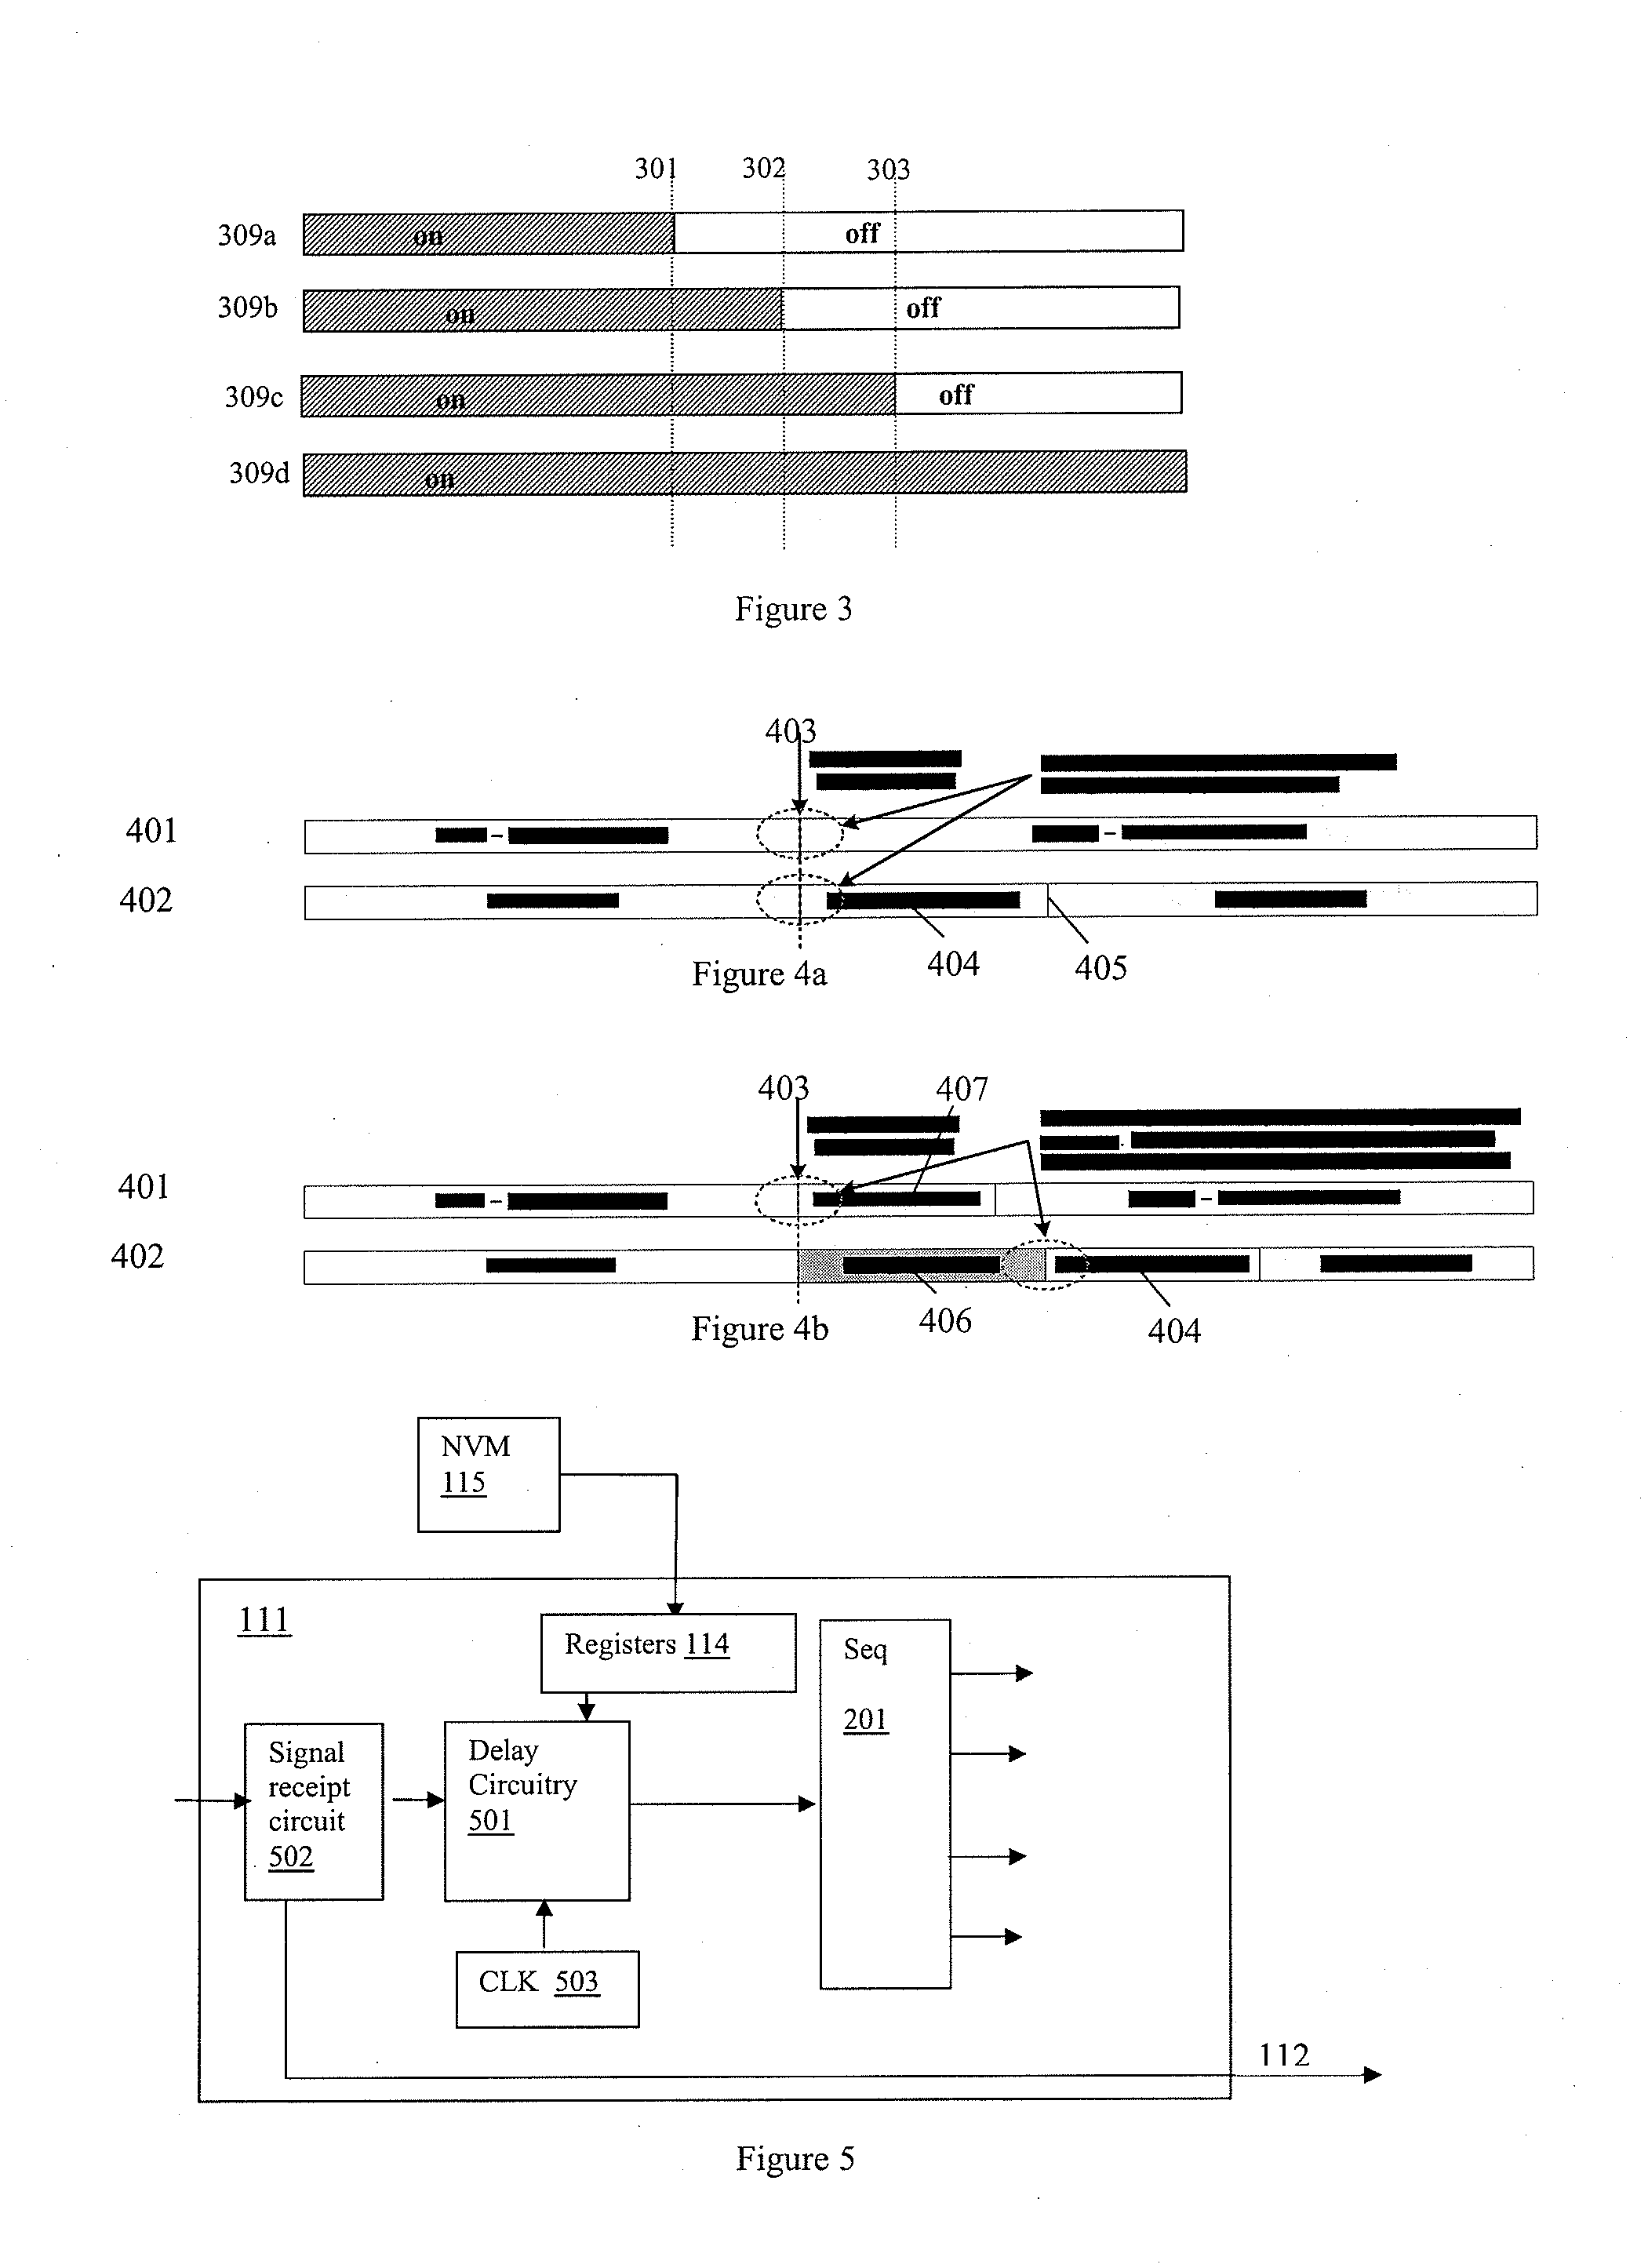 Power management apparatus and methods